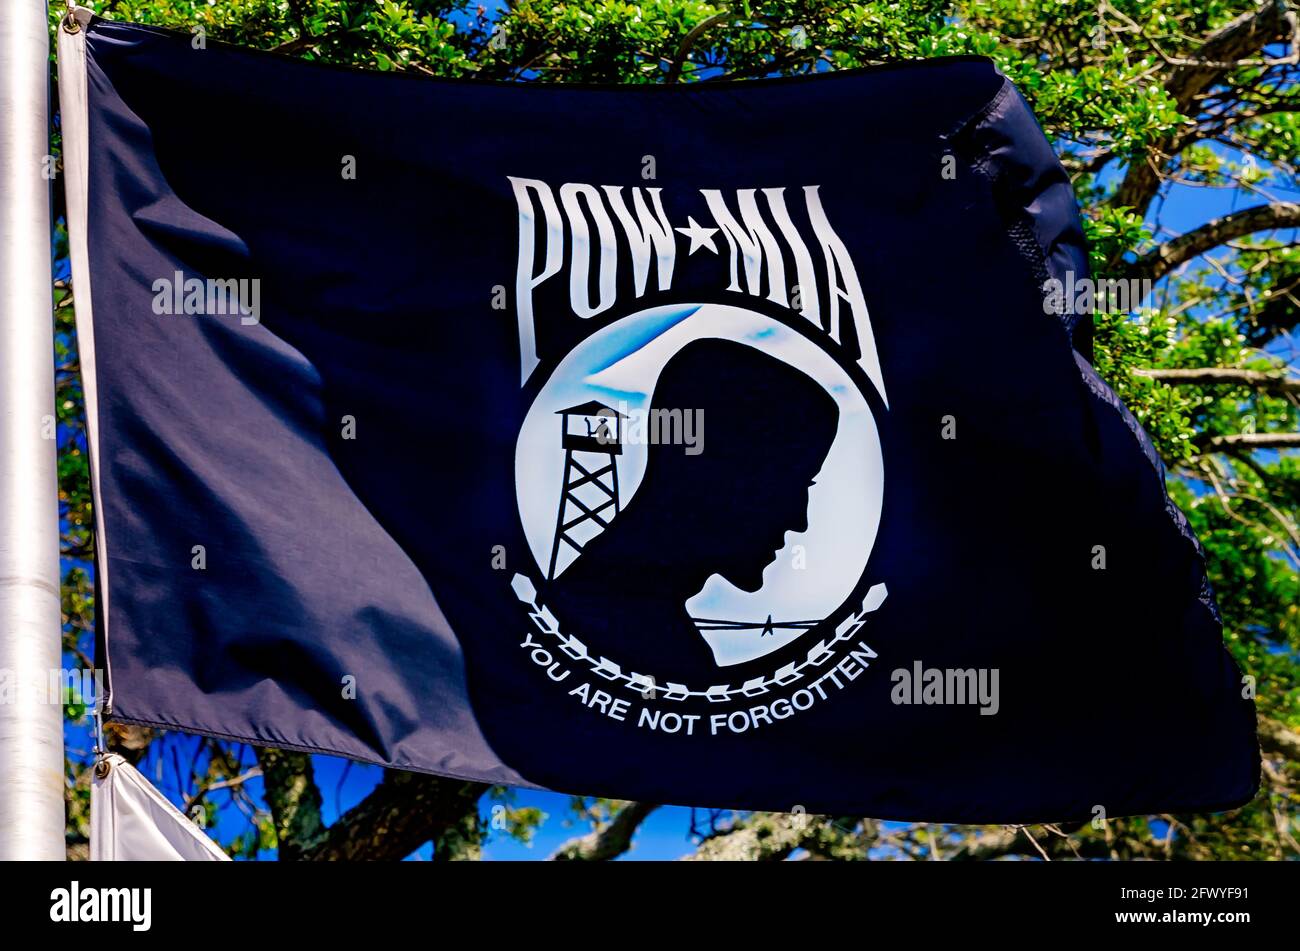 A POW-MIA flag for Prisoners of War and soldiers Missing in Action flies,  May 8, 2021, at Guice Park in Biloxi, Mississippi. Stock Photo